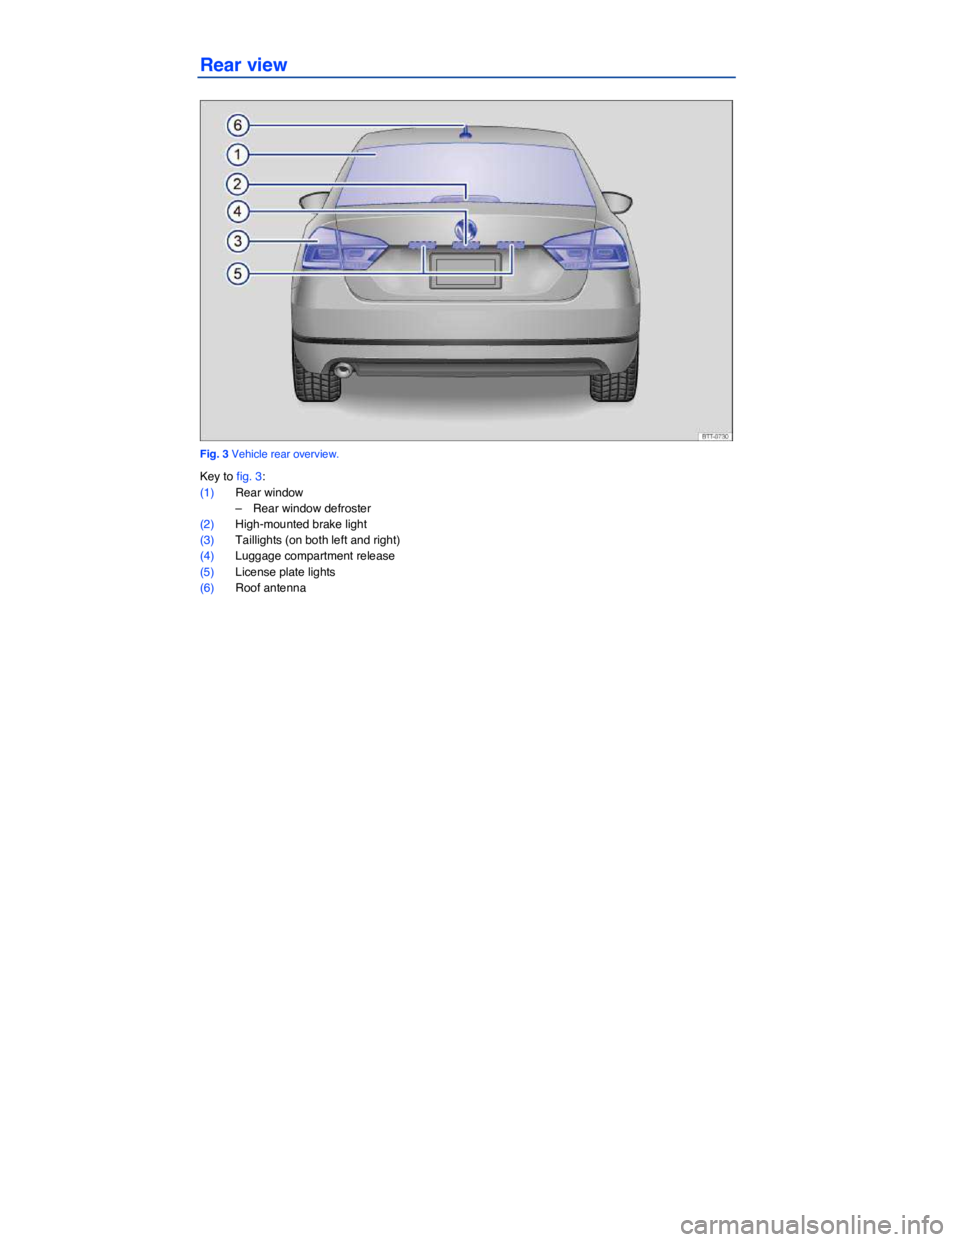 VOLKSWAGEN PASSAT 2011  Owners Manual  
Rear view 
 
Fig. 3 Vehicle rear overview. 
Key to fig. 3: 
(1) Rear window 
–  Rear window defroster  
(2) High-mounted brake light 
(3) Taillights (on both left and right)  
(4) Luggage compartm